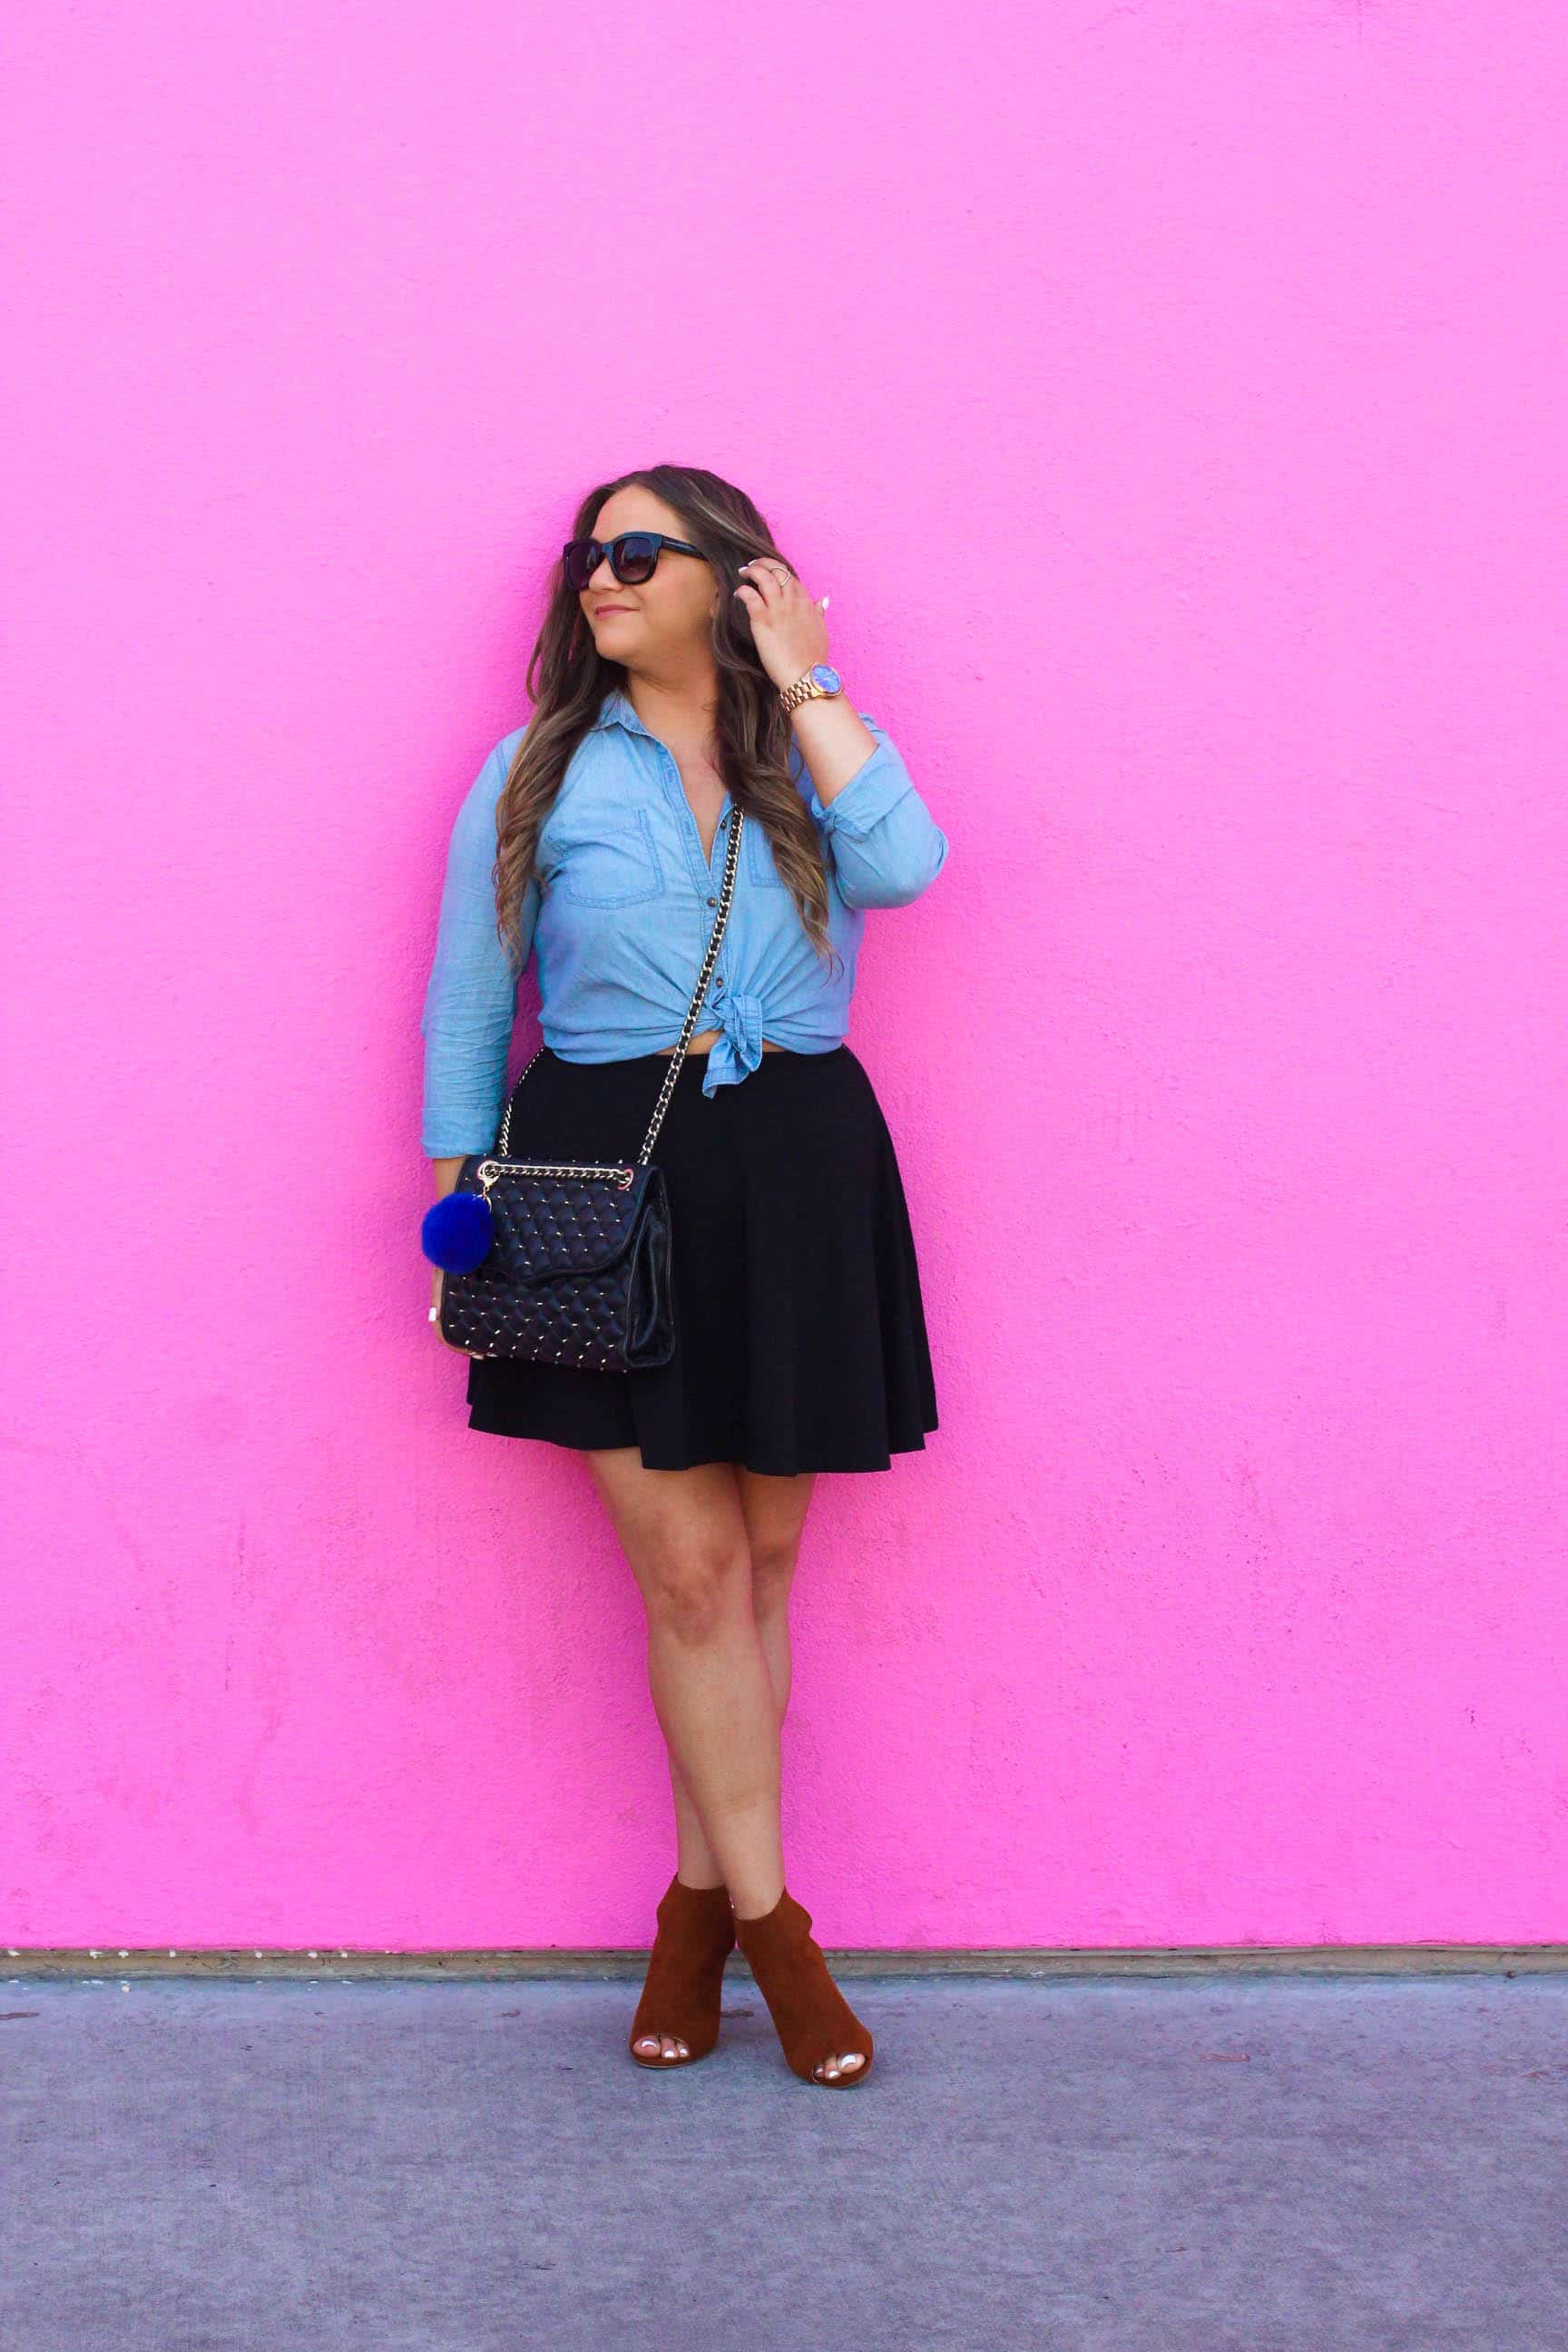 missyonmadison, melissa tierney, missyonmadison instagram, fashion blog, fashion blogger, bloglovin, style goals, style watch, forever 21, black mini skirt, black skater skirt, chesnut booties, tan booties, peep toe booties, rebecca minkoff, quilted bag, rebecca minkoff affair bag, rebecca minkoff quilted bag, wayfarer sunglasses, raybans, womens raybans, womens wayfarer sunglasses, that pink wall, pink wall la, pink wall, wall charades, wall crawl, blue pom pom, blue pom pom keychain, wall crawl la, la wall crawl, best murals in la, paul smith pink wall, la blogger, la style, chambray button down, old navy, chambray button down shirt,